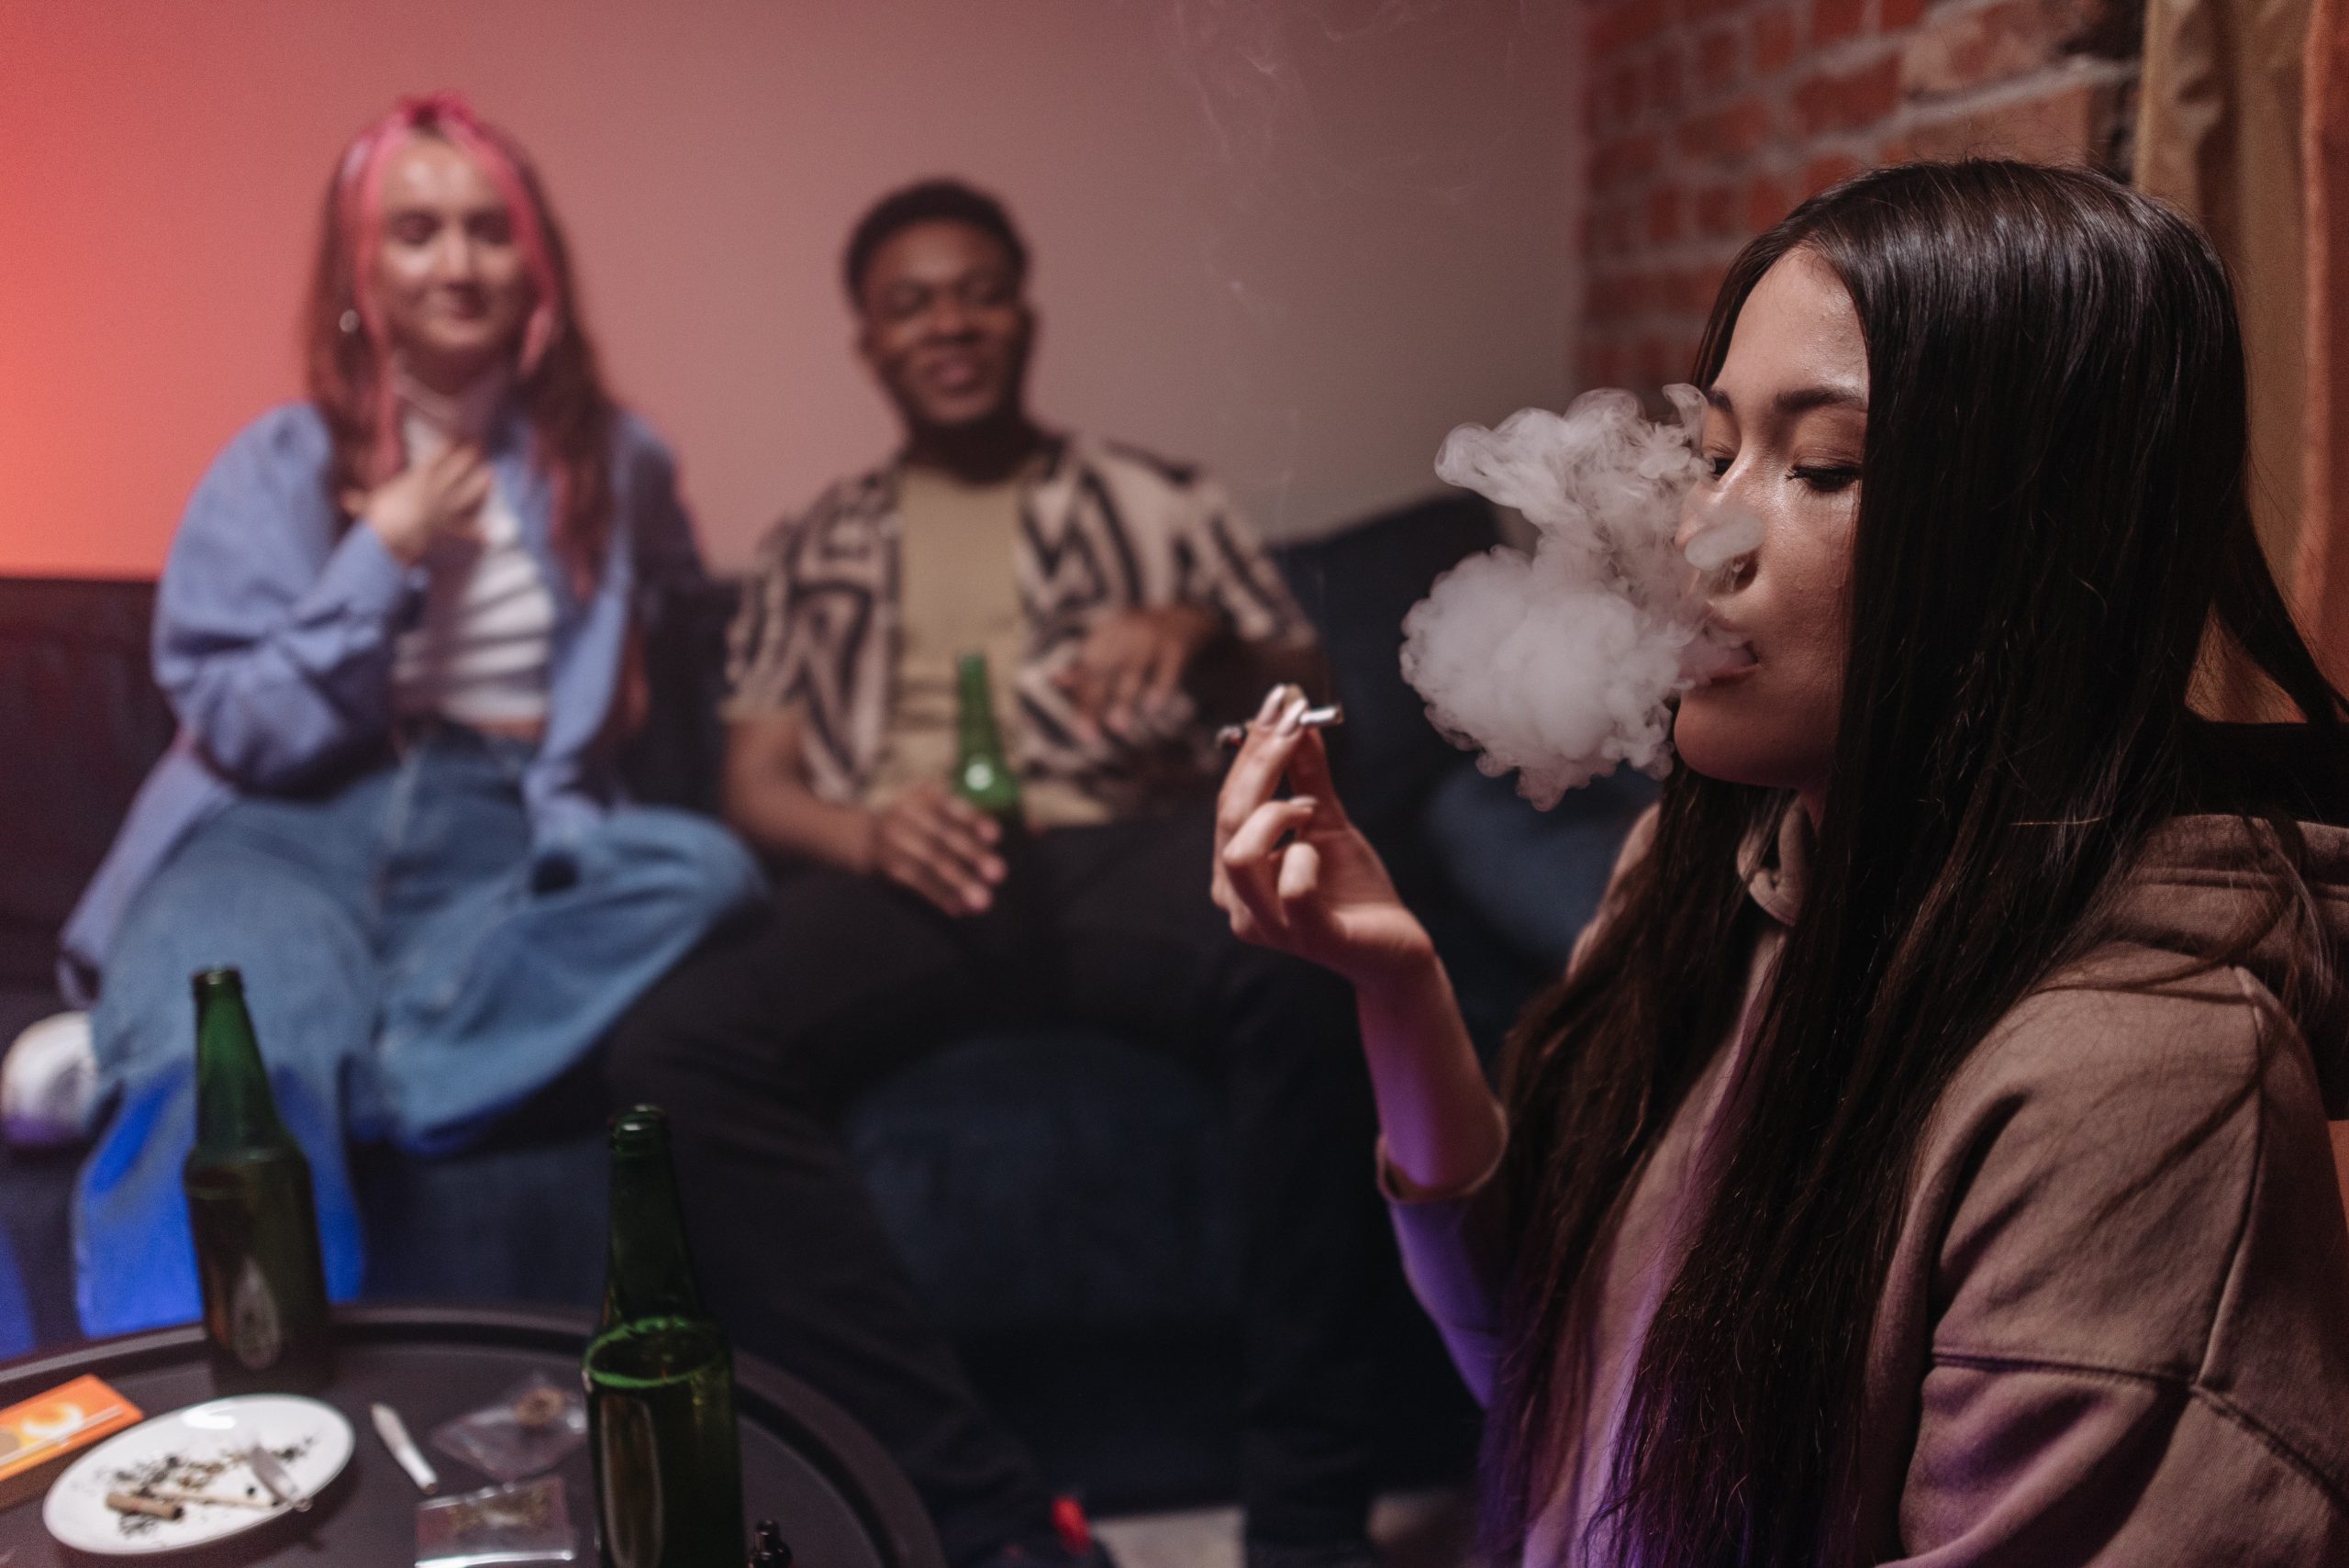 The Effects of Weed: Debunking Stereotypes